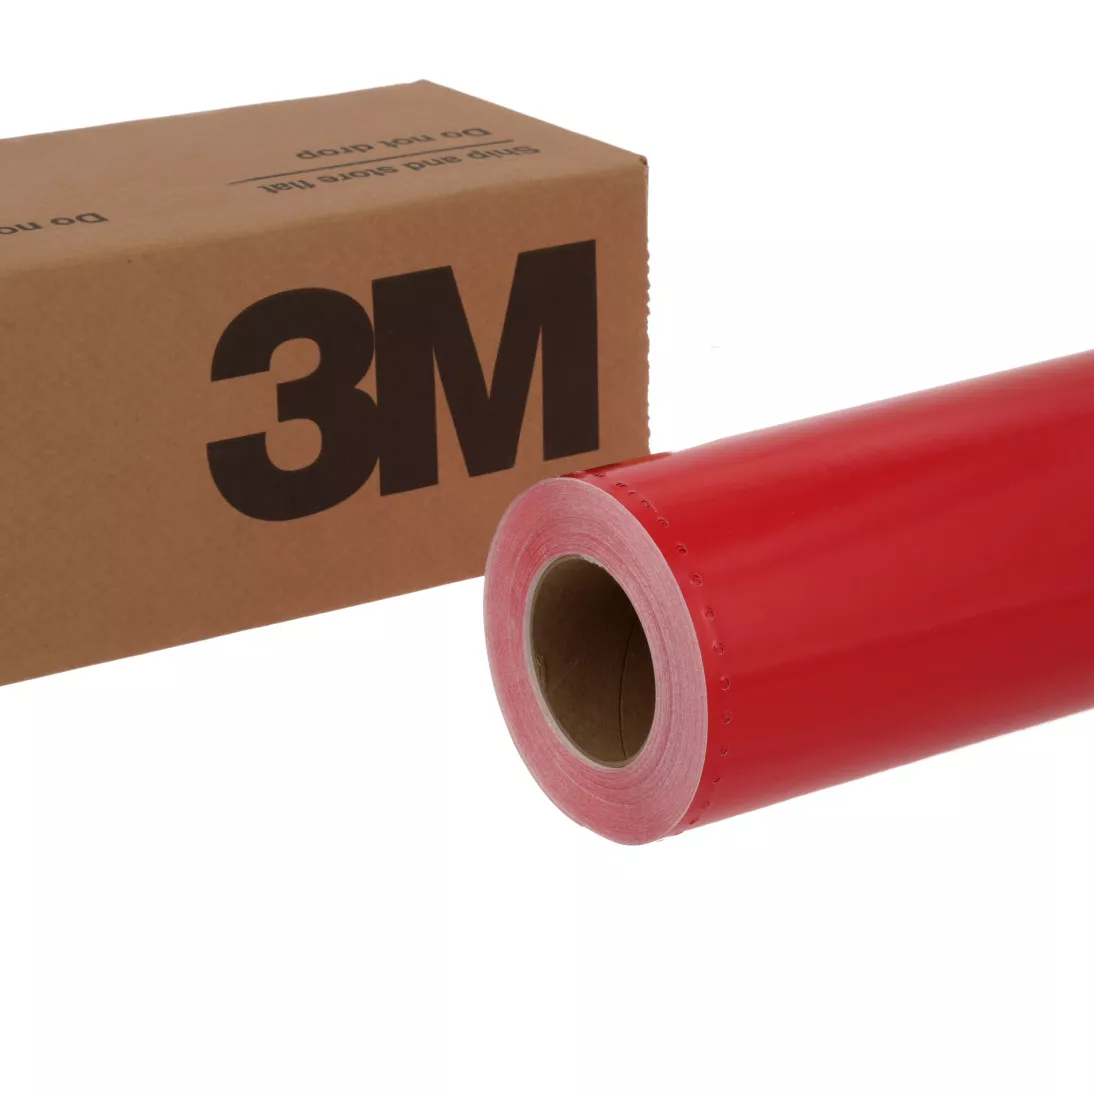 3M™ Wrap Film Series 1080-G2473, Gloss Red, 60 in x 25 yd